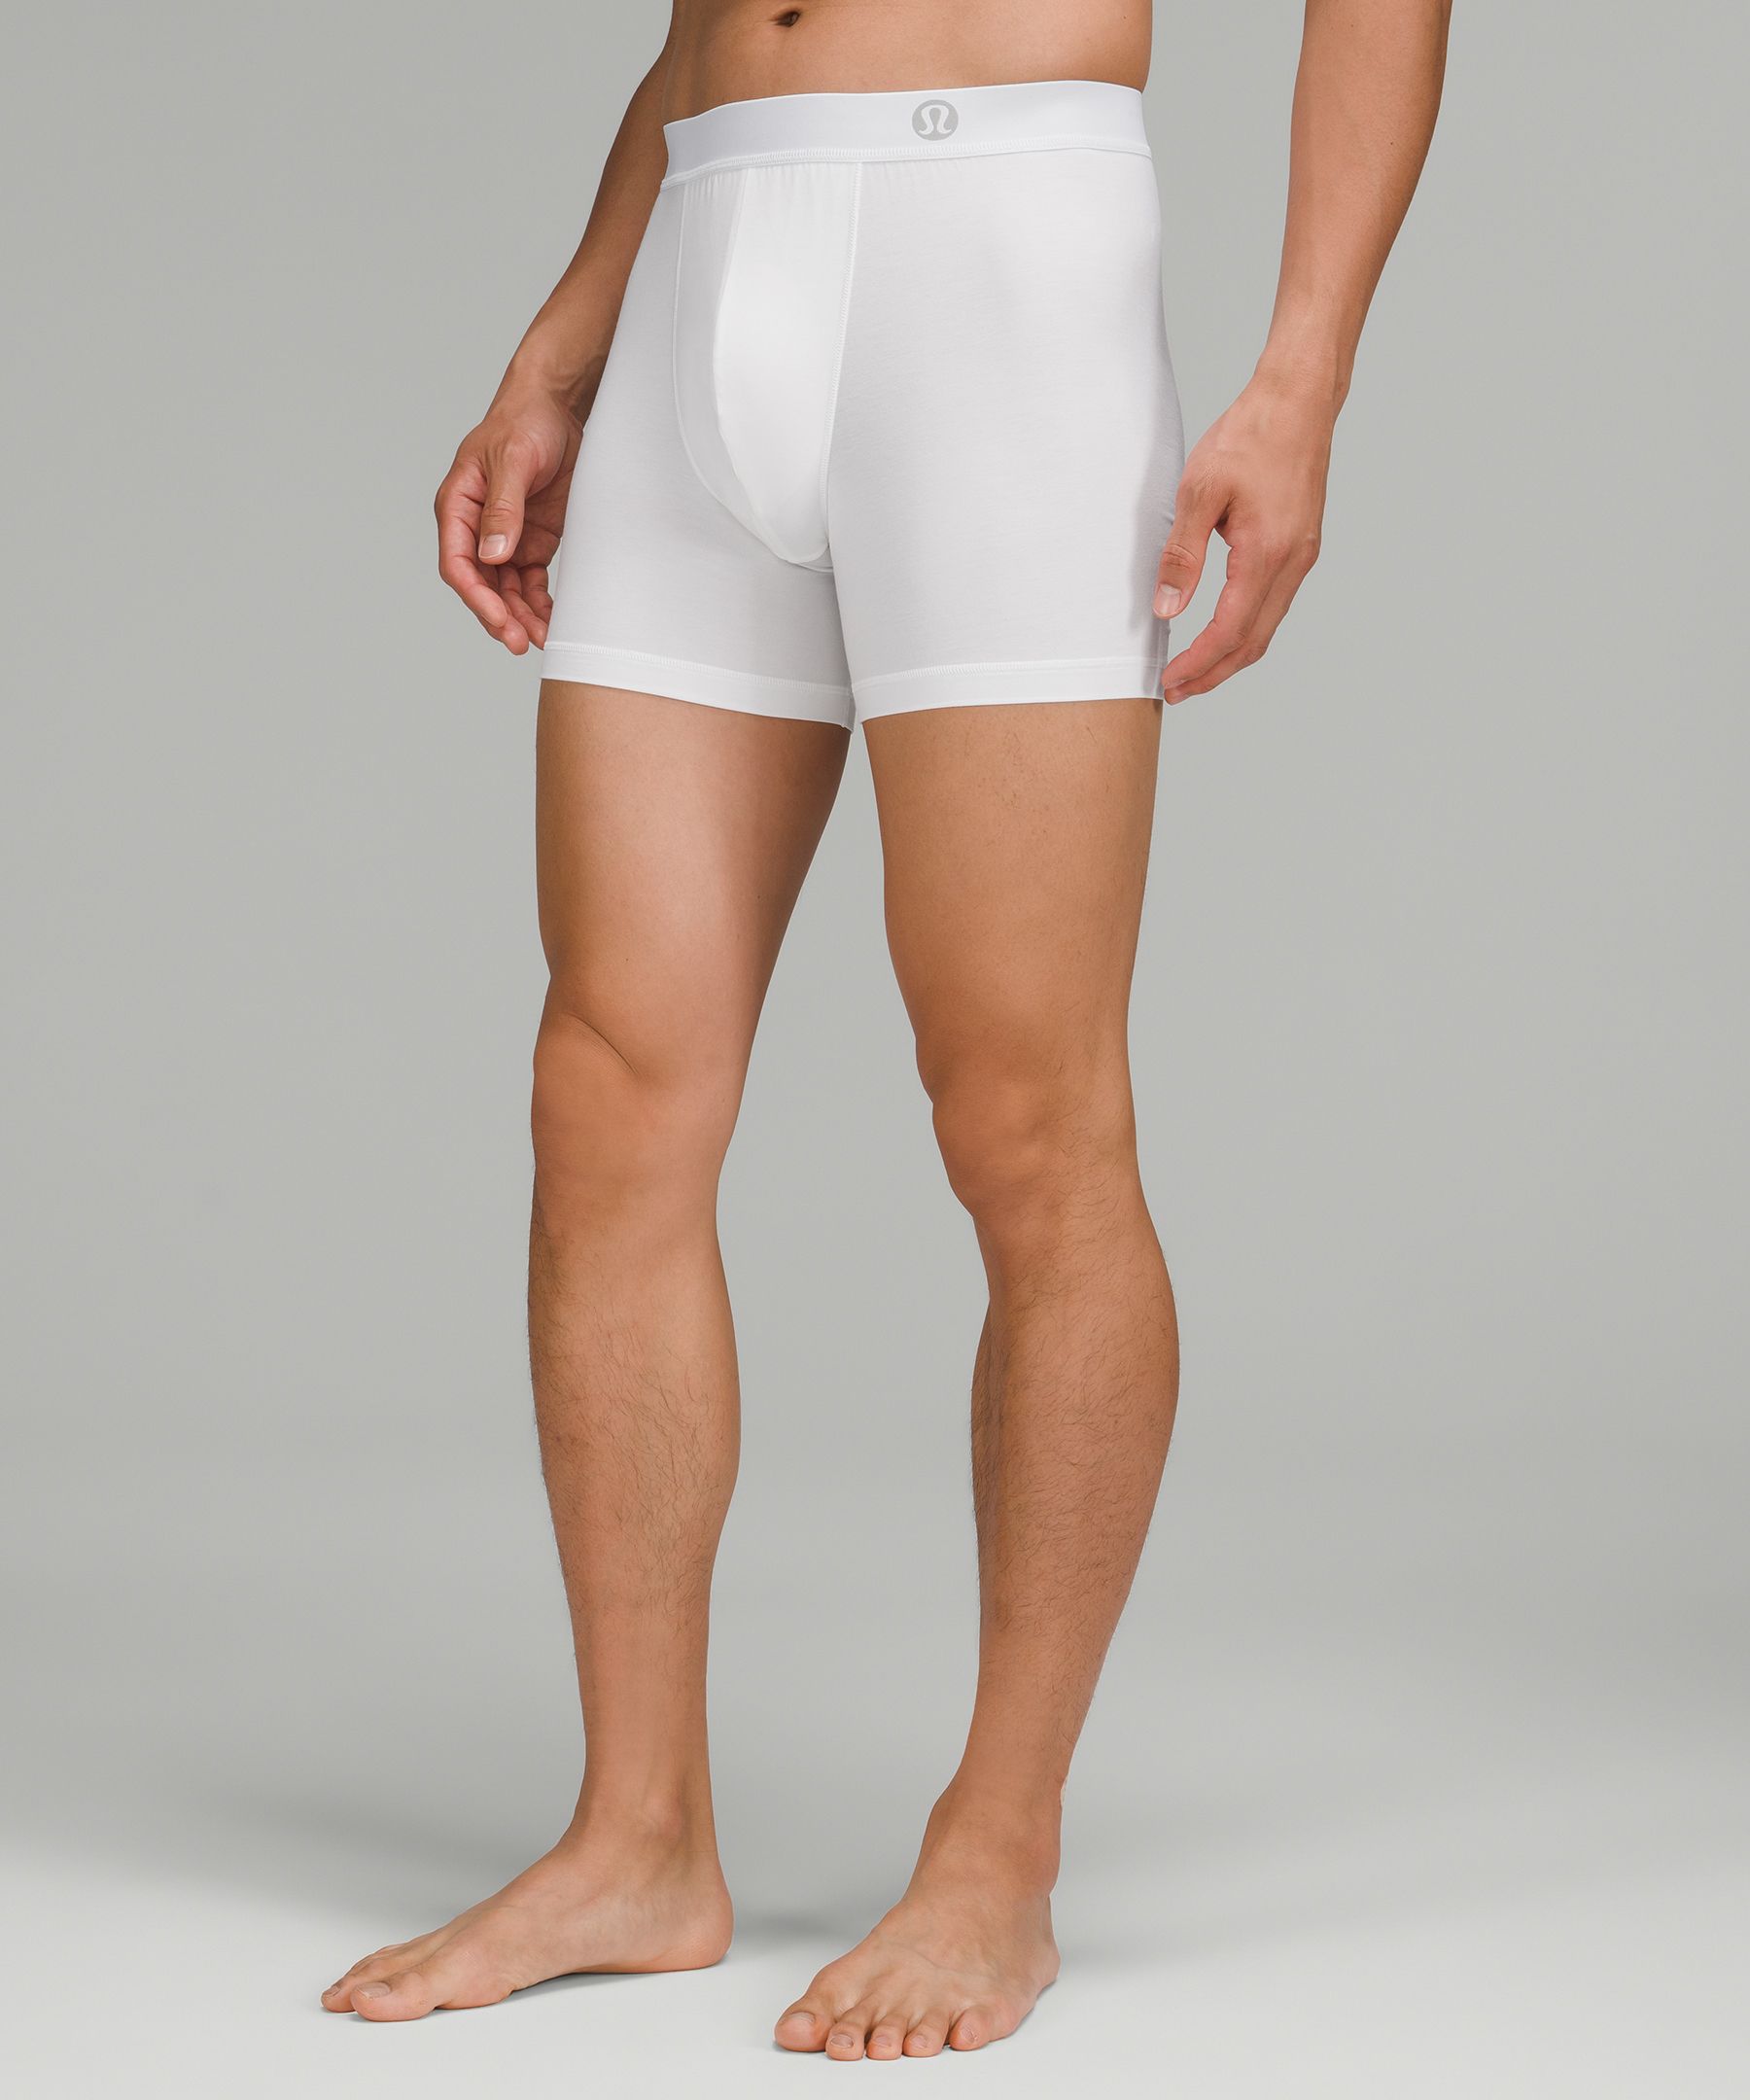 Lululemon Men's Underwear Review  International Society of Precision  Agriculture